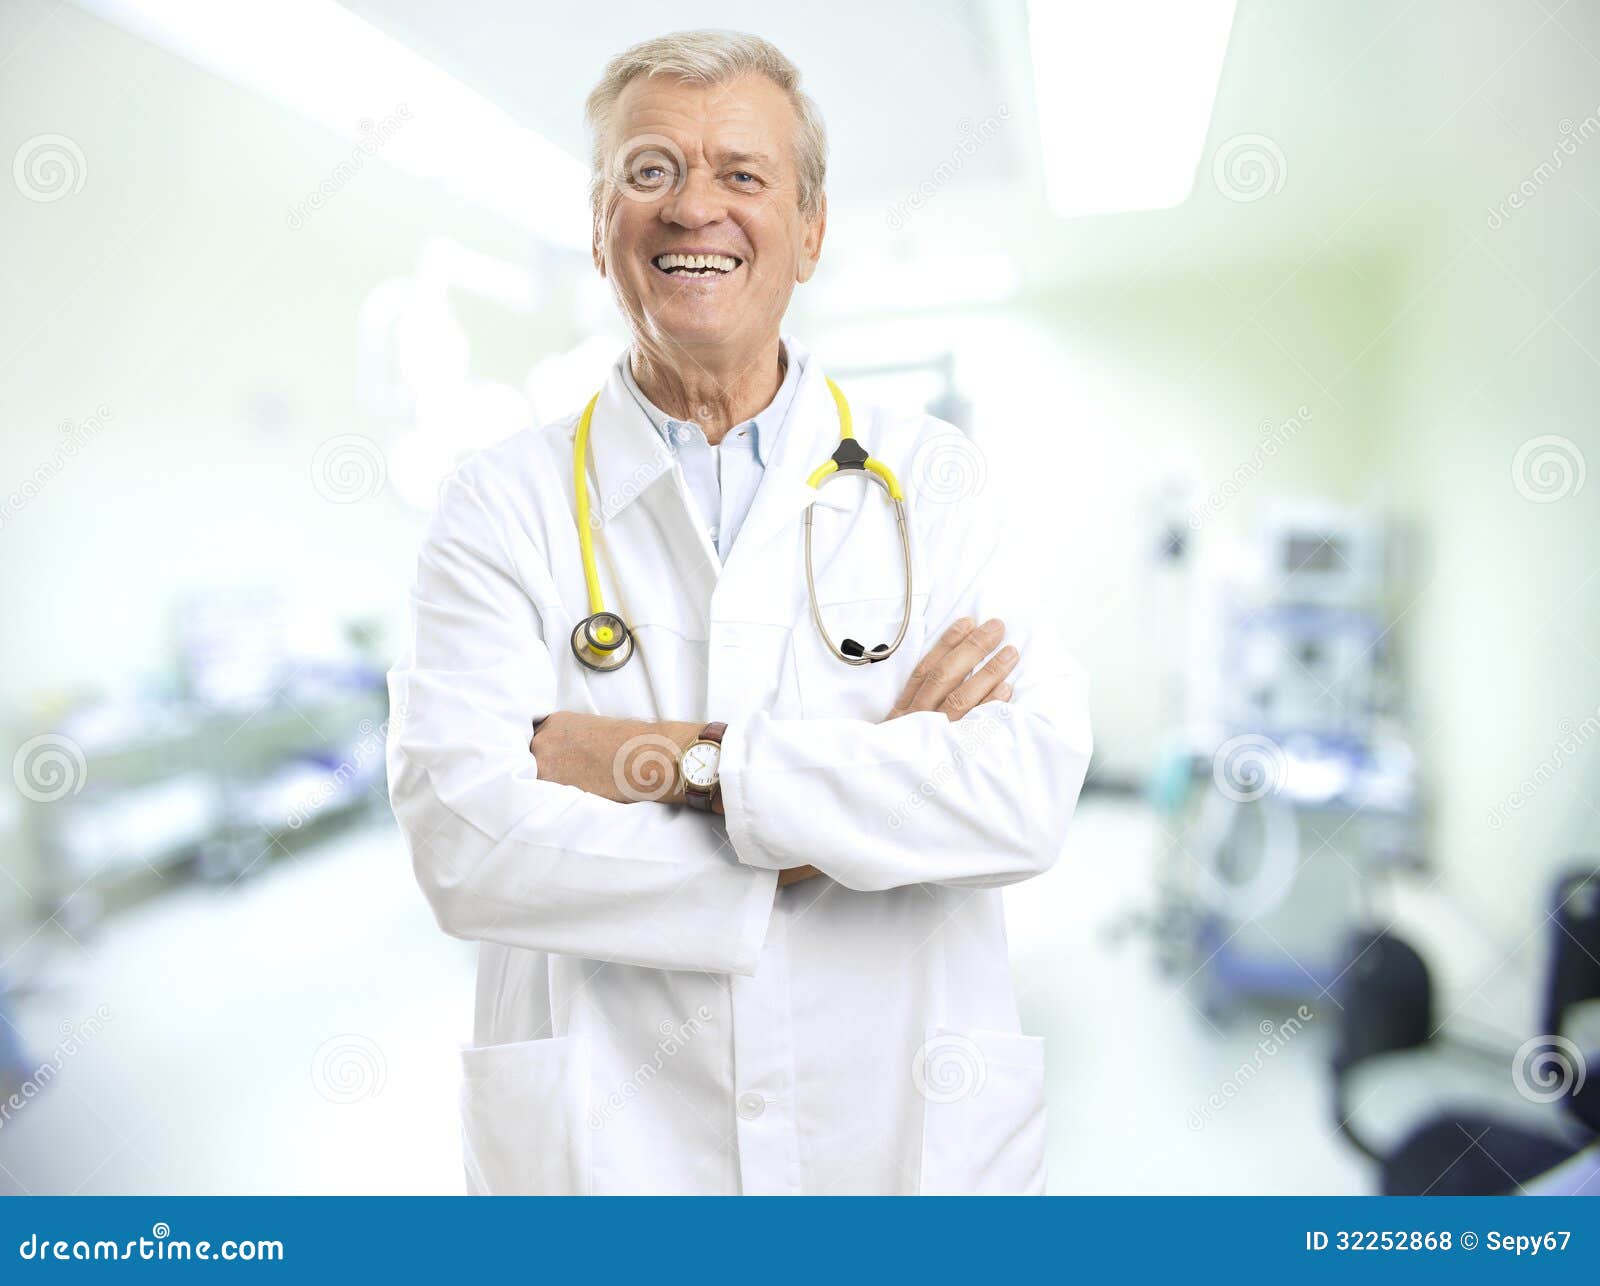 Mature Male Doctor stock photo. Image of toothy, shot - 32252868